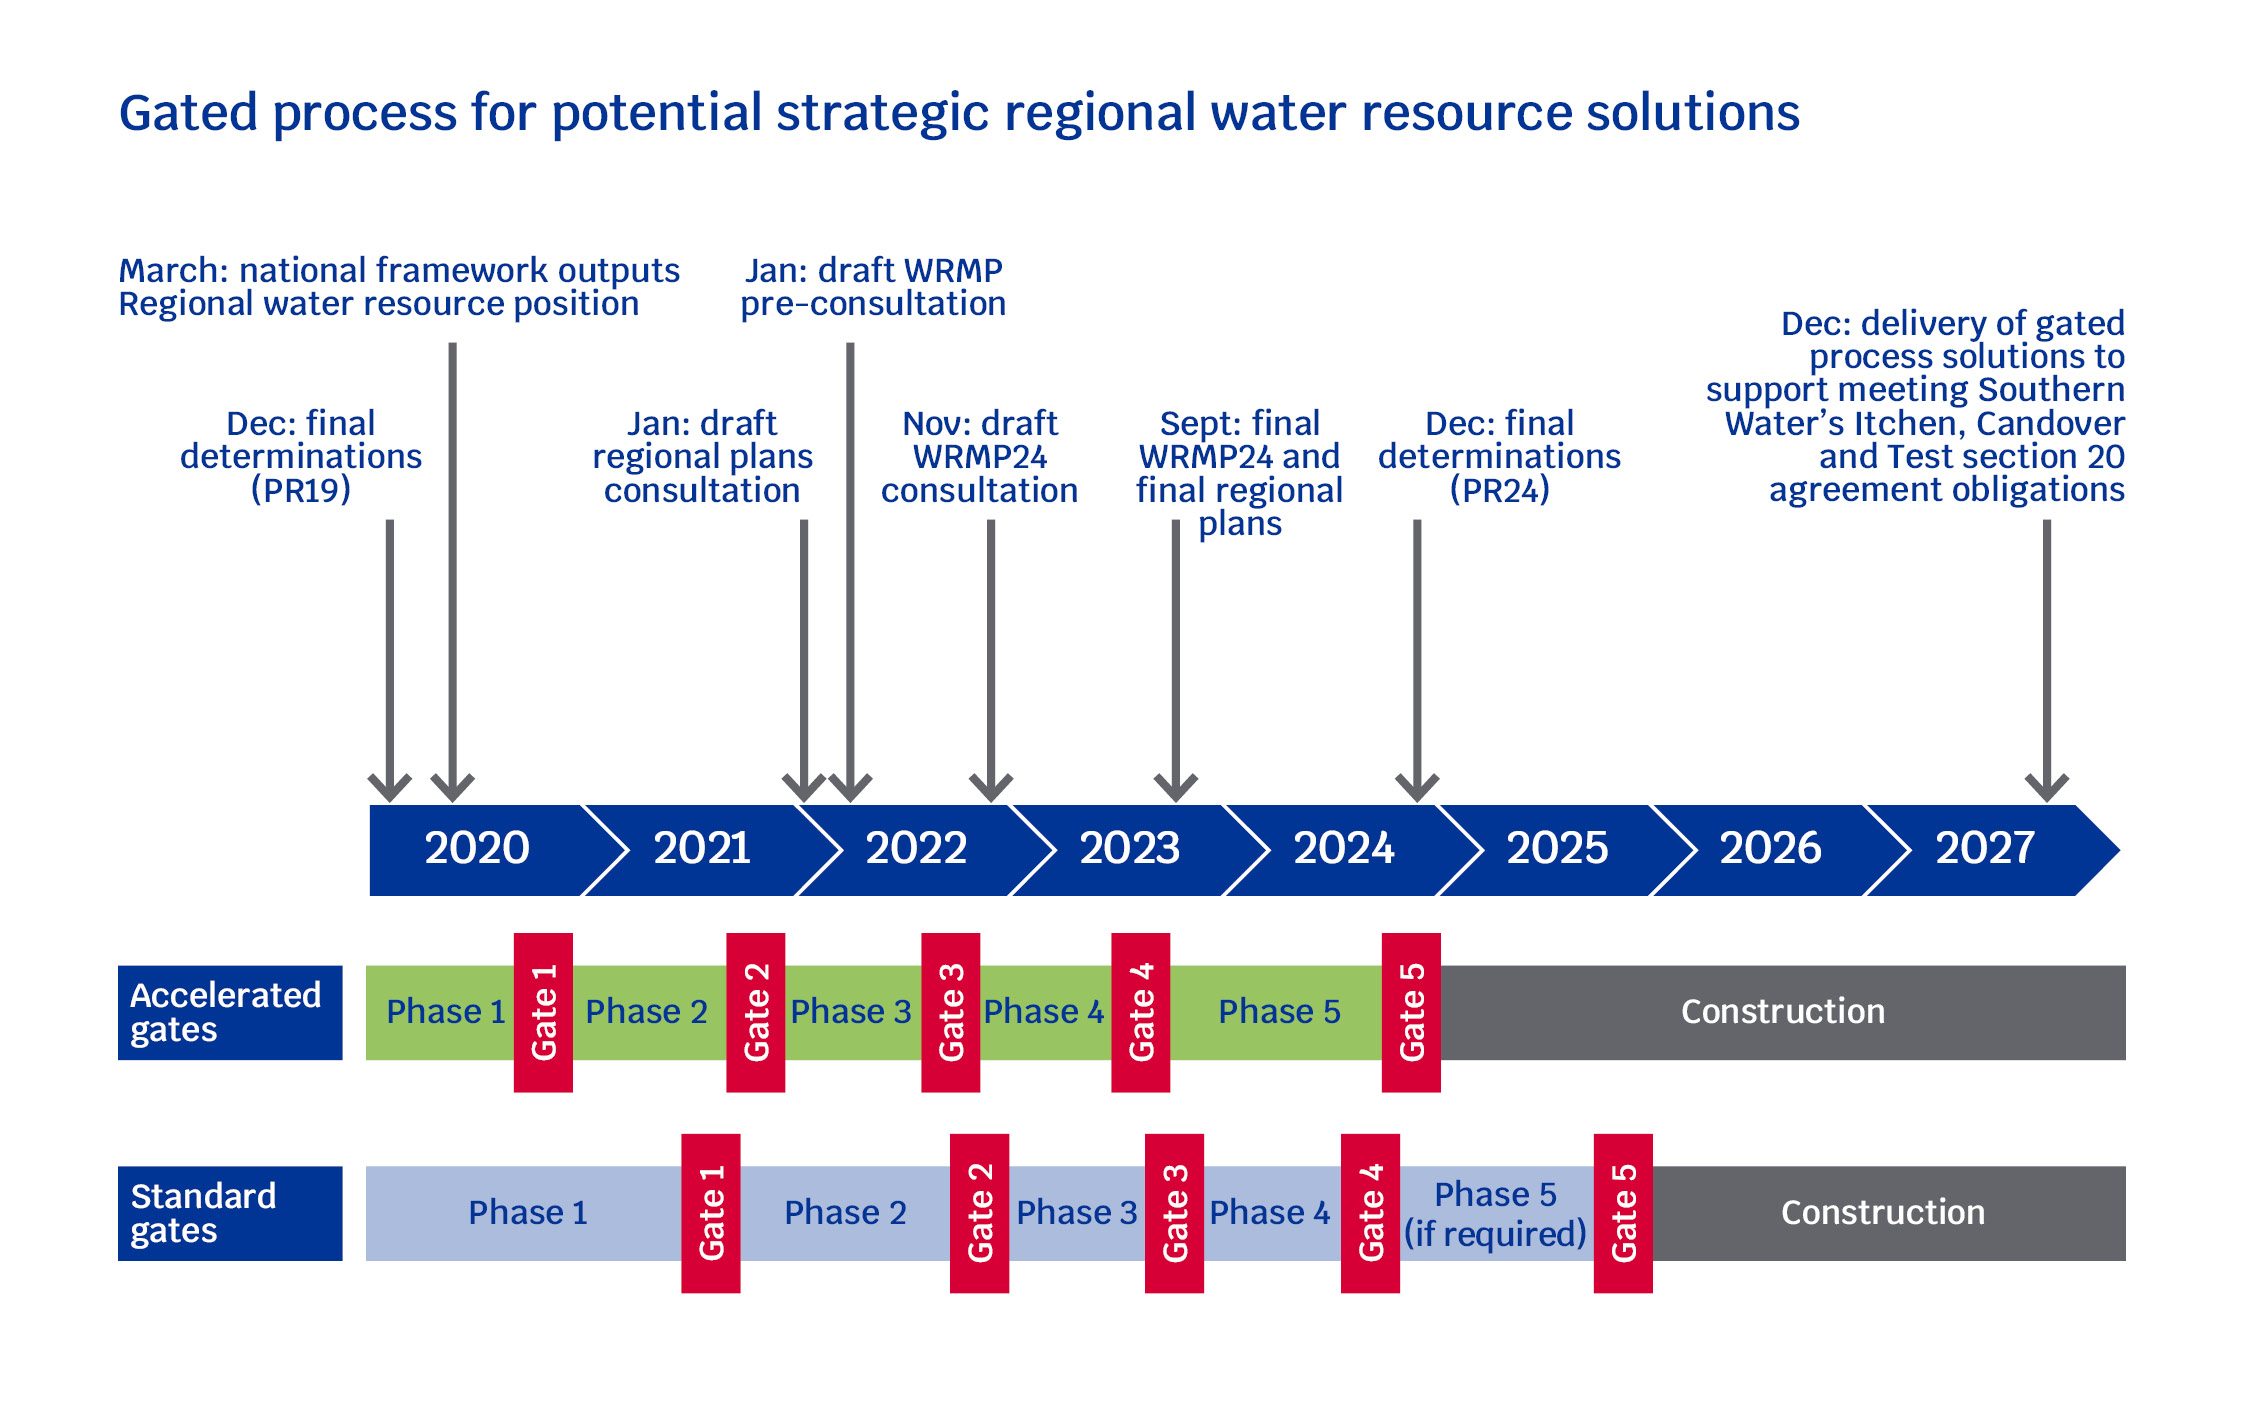 An image showing the gated process for potential strategic regional water resource solutions